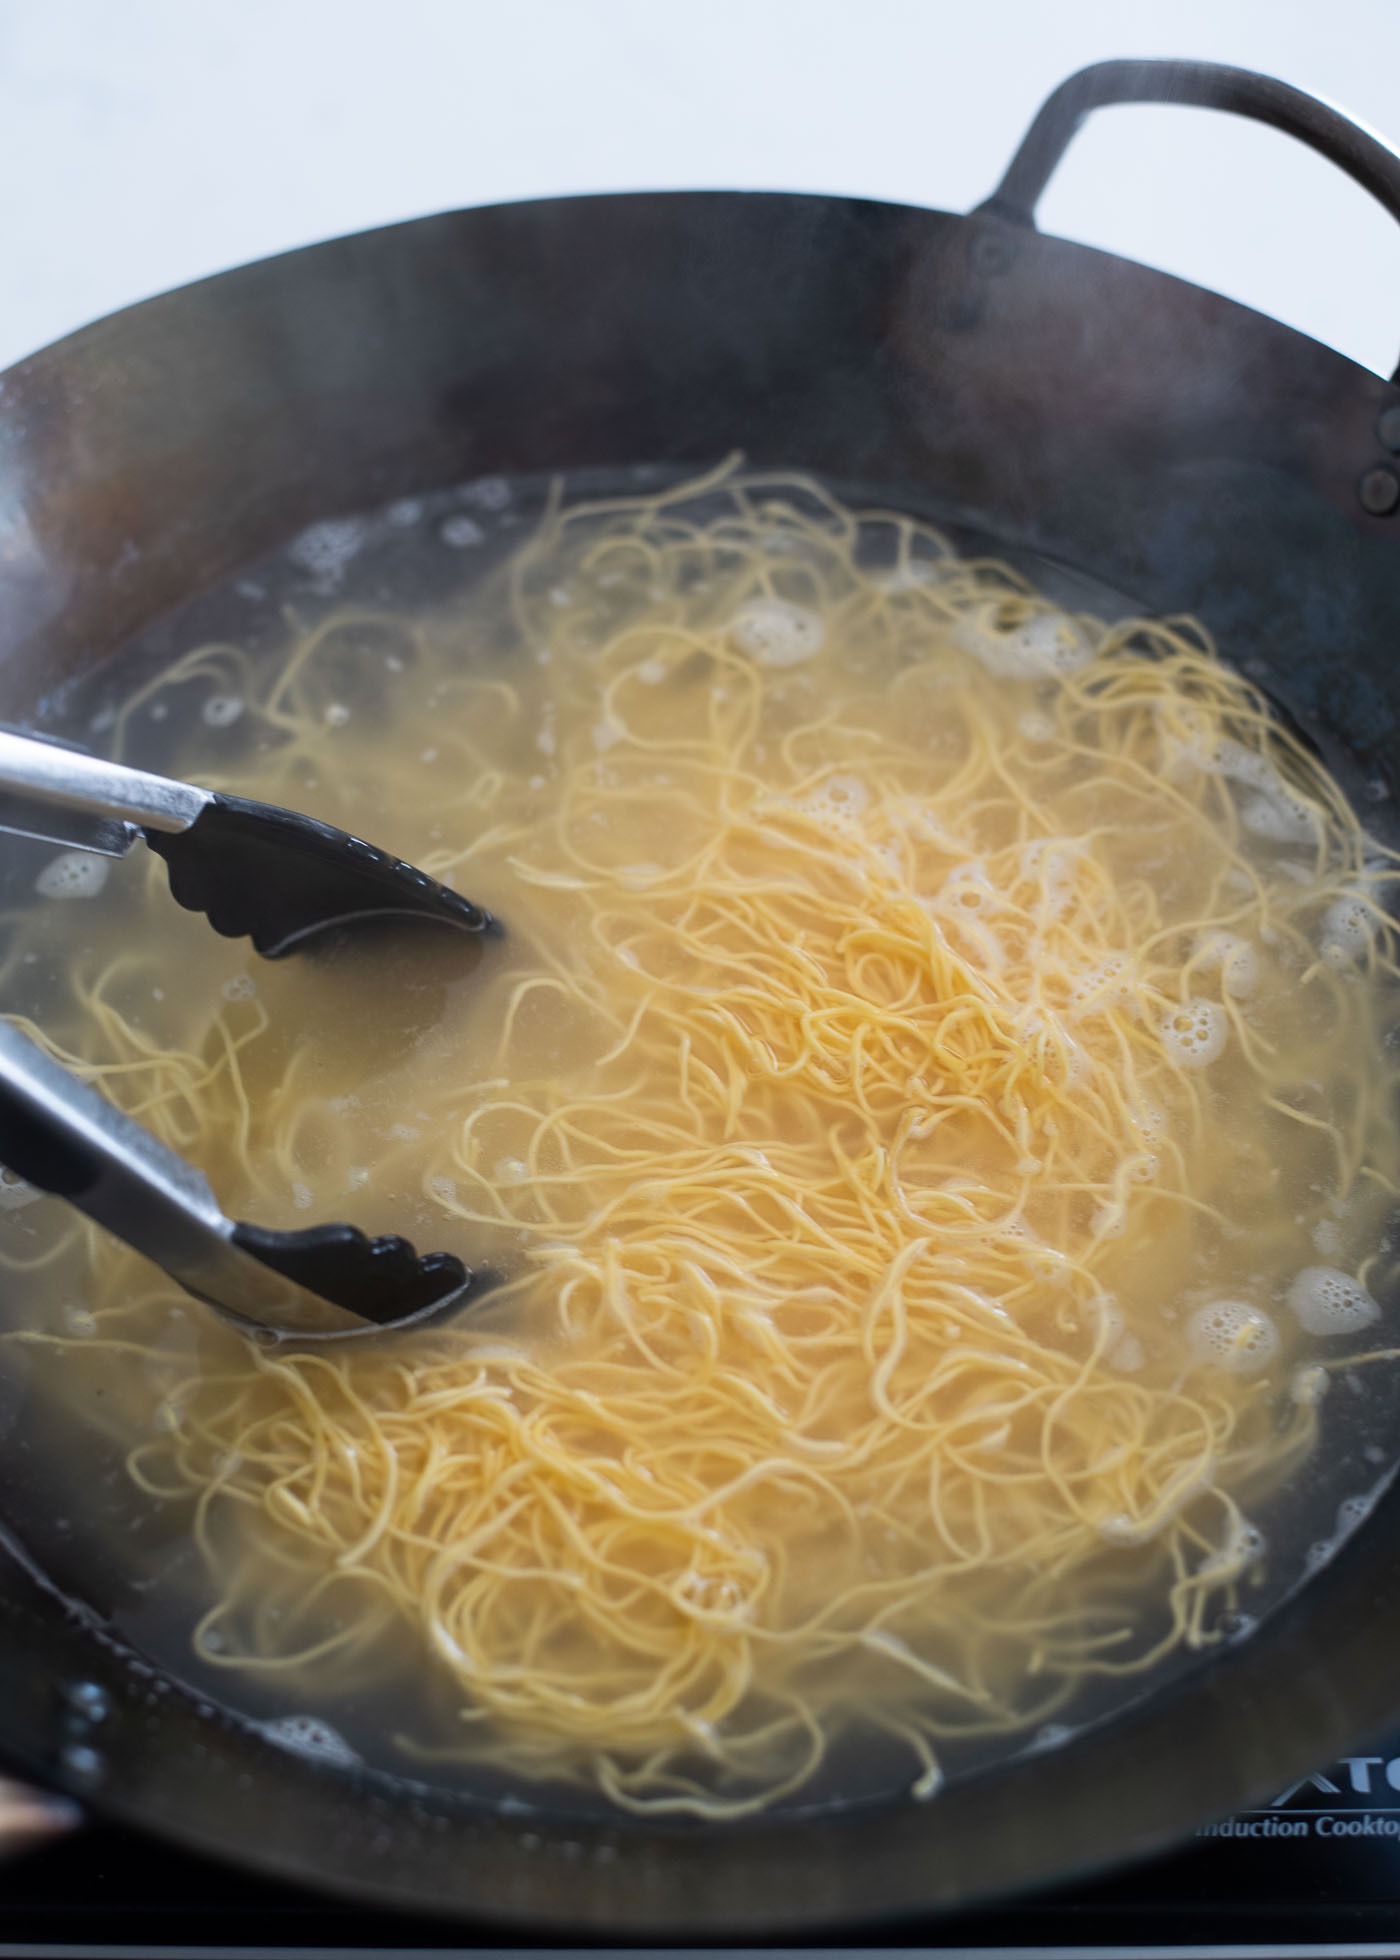 Egg noodles being cooked in boiling water in a wok.